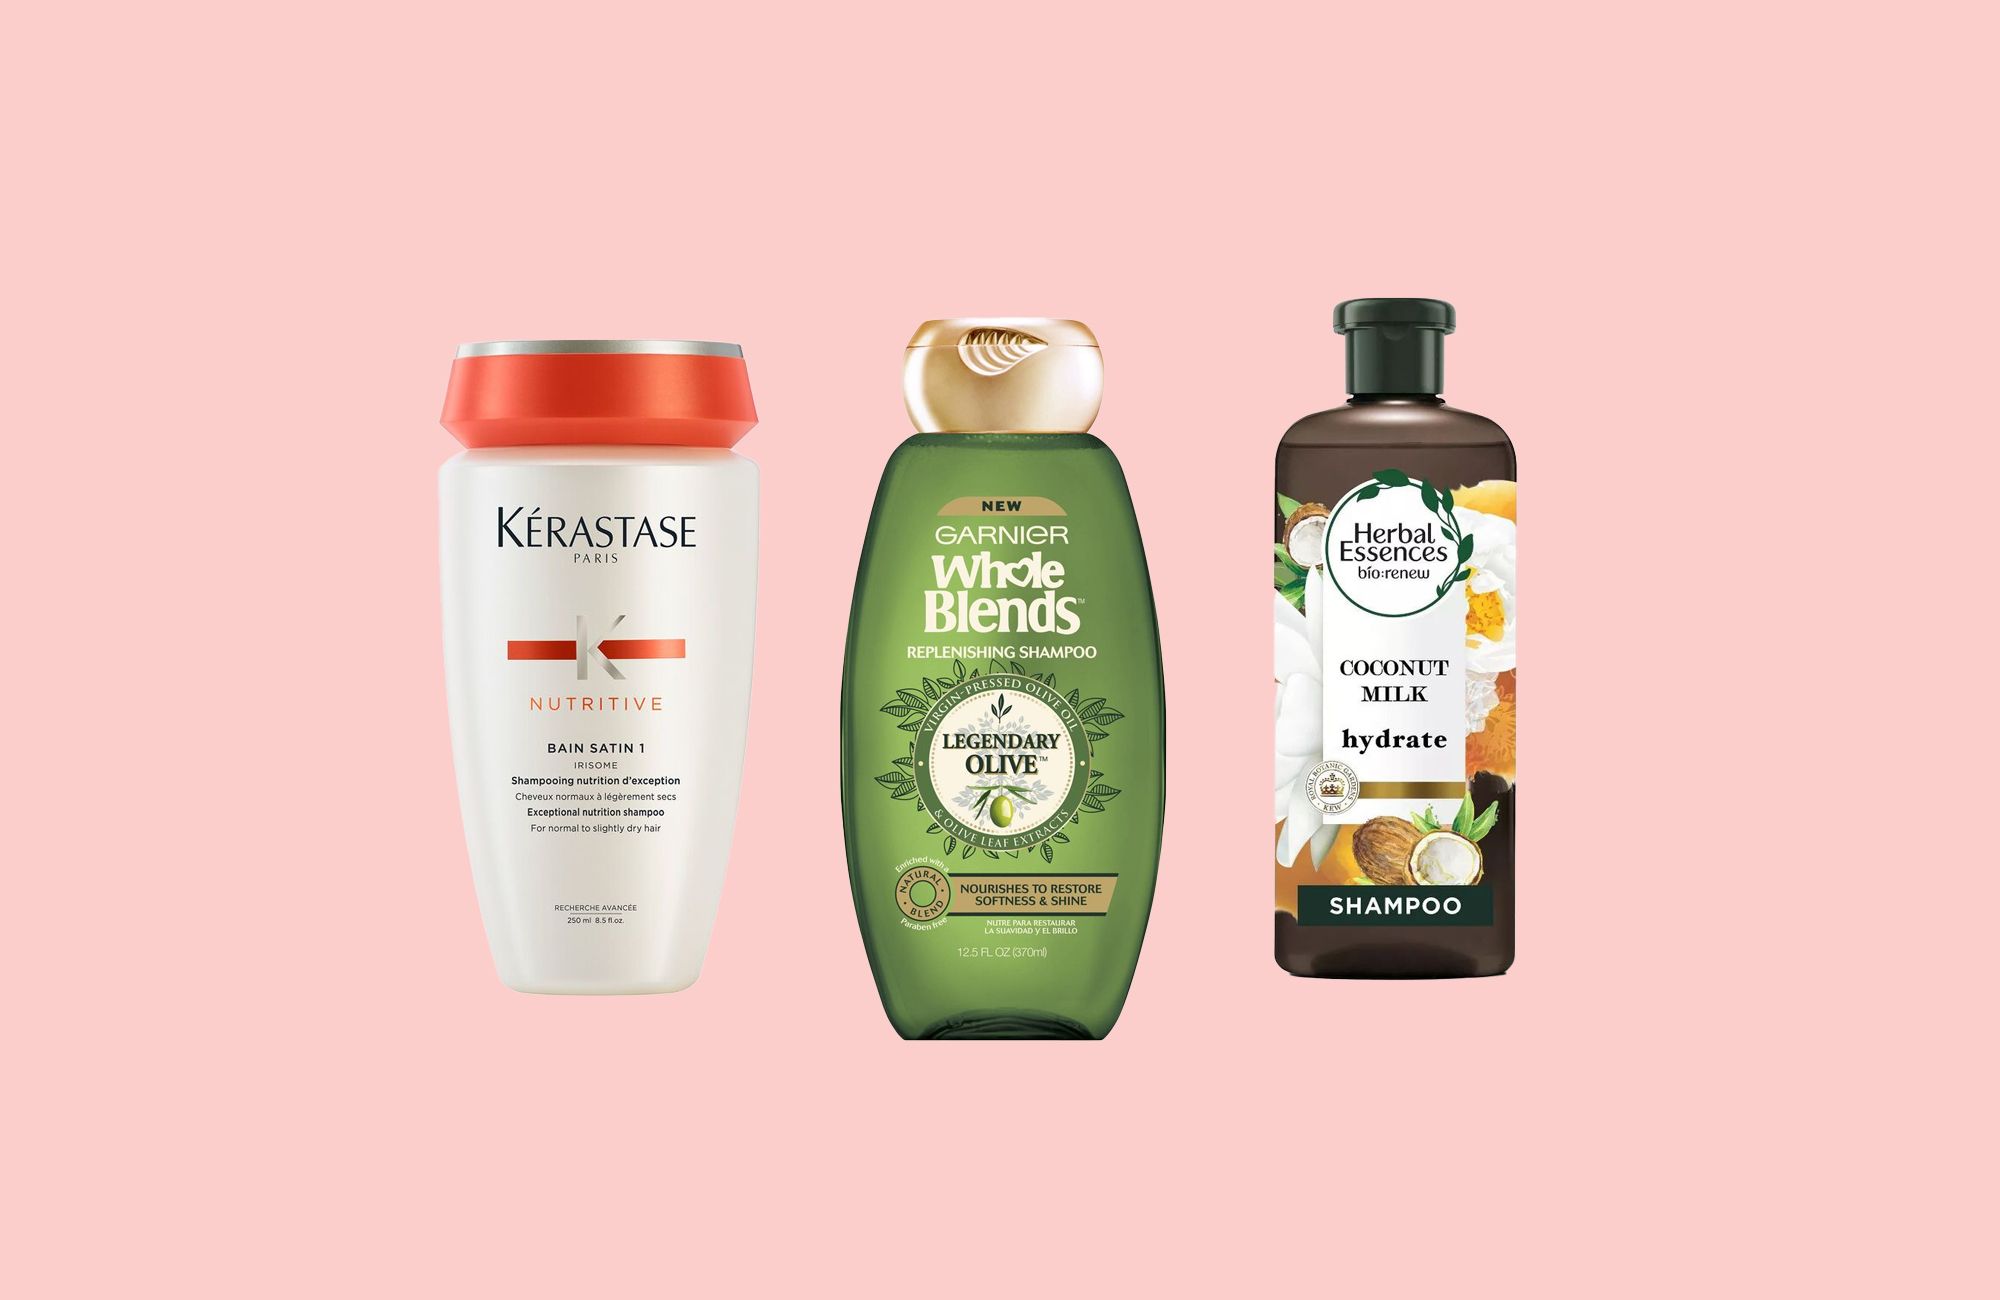 Herbal Shampoo For Hair Guide: Best Herbal Shampoo For Hair| Nykaa's Beauty  Book